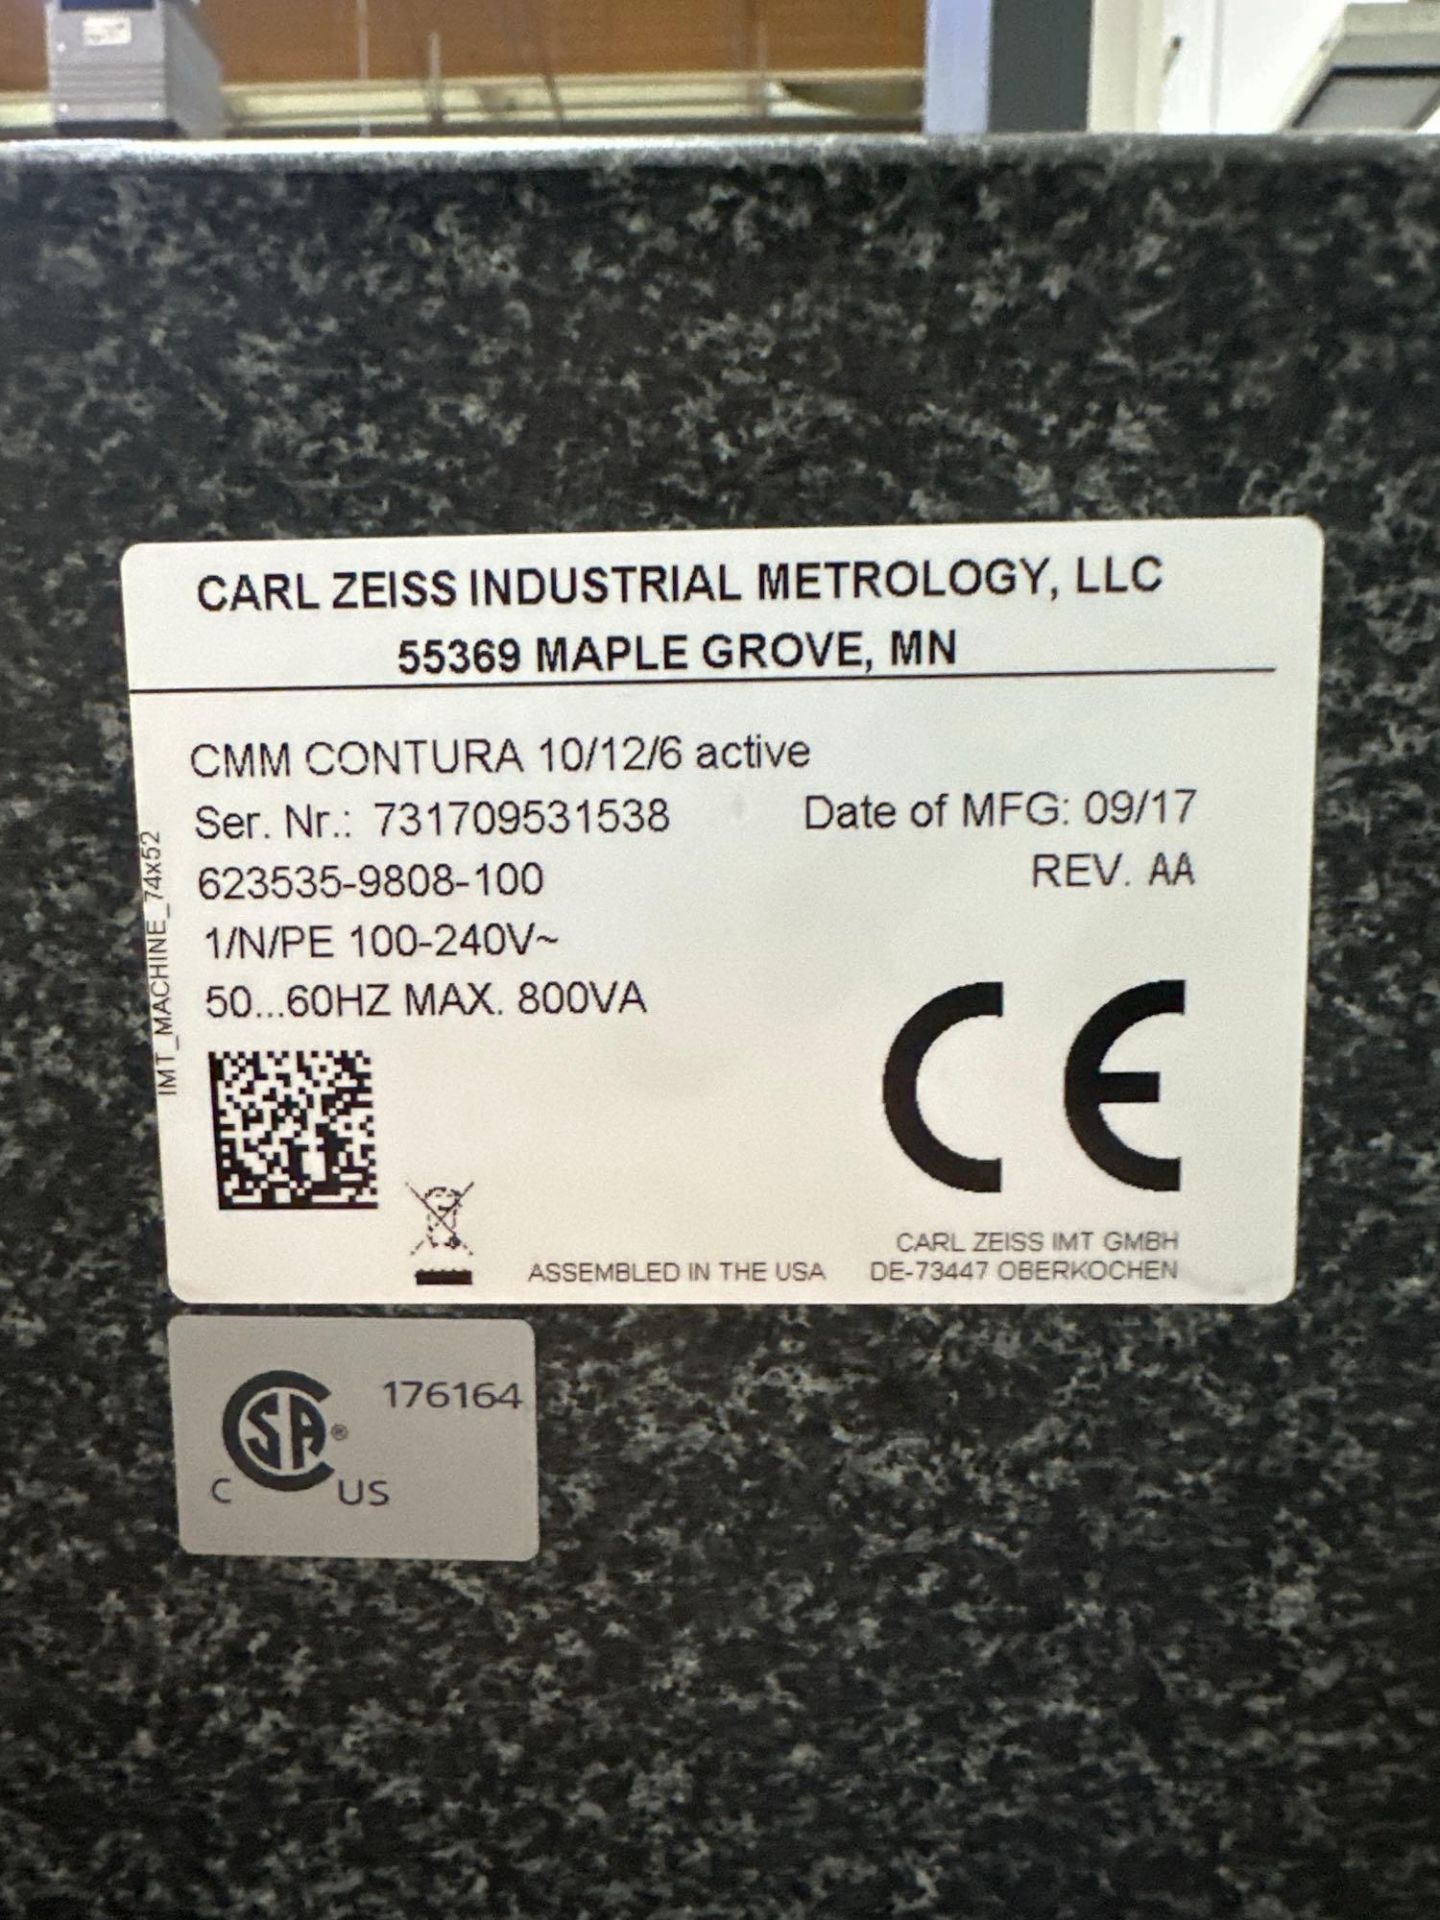 Zeiss Contura 10/12/6 CMM, 10” x 49” x 56” Surface Plate *Machine can be released April 15, 2024* - Image 10 of 11